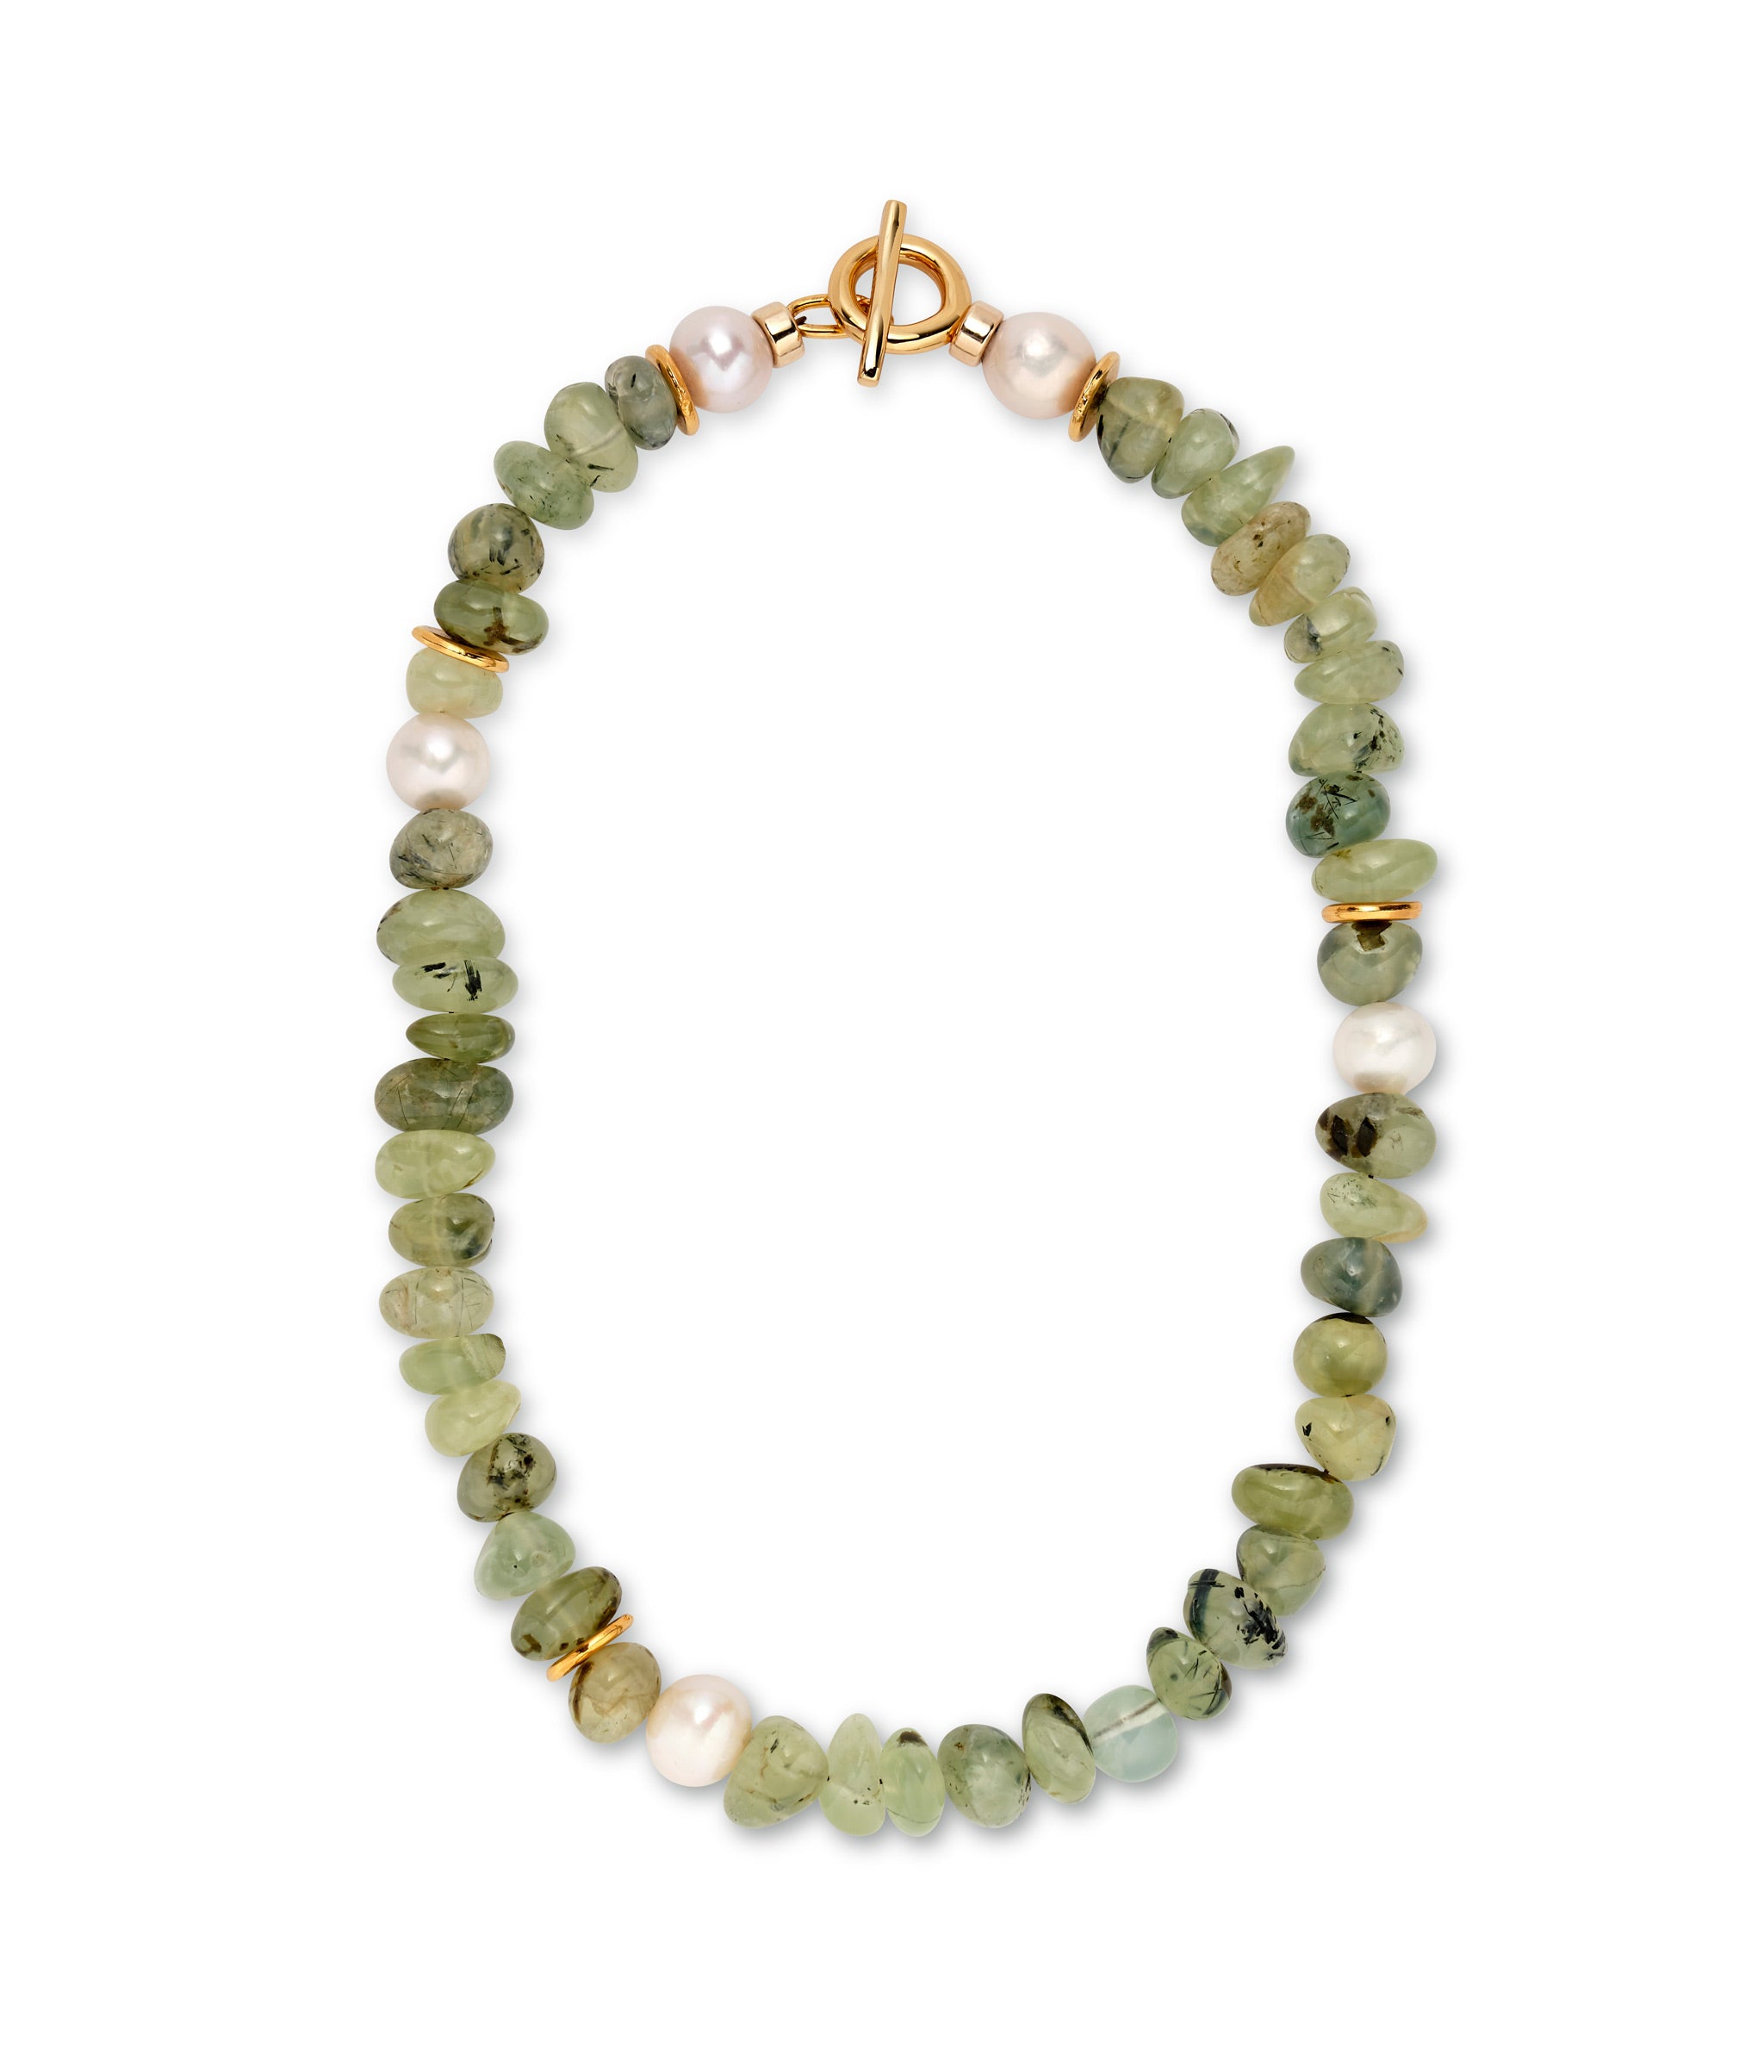 Mood Necklace in Prehnite. Green prehenite necklace with freshwater pearls and gold plated brass with toggle closure.